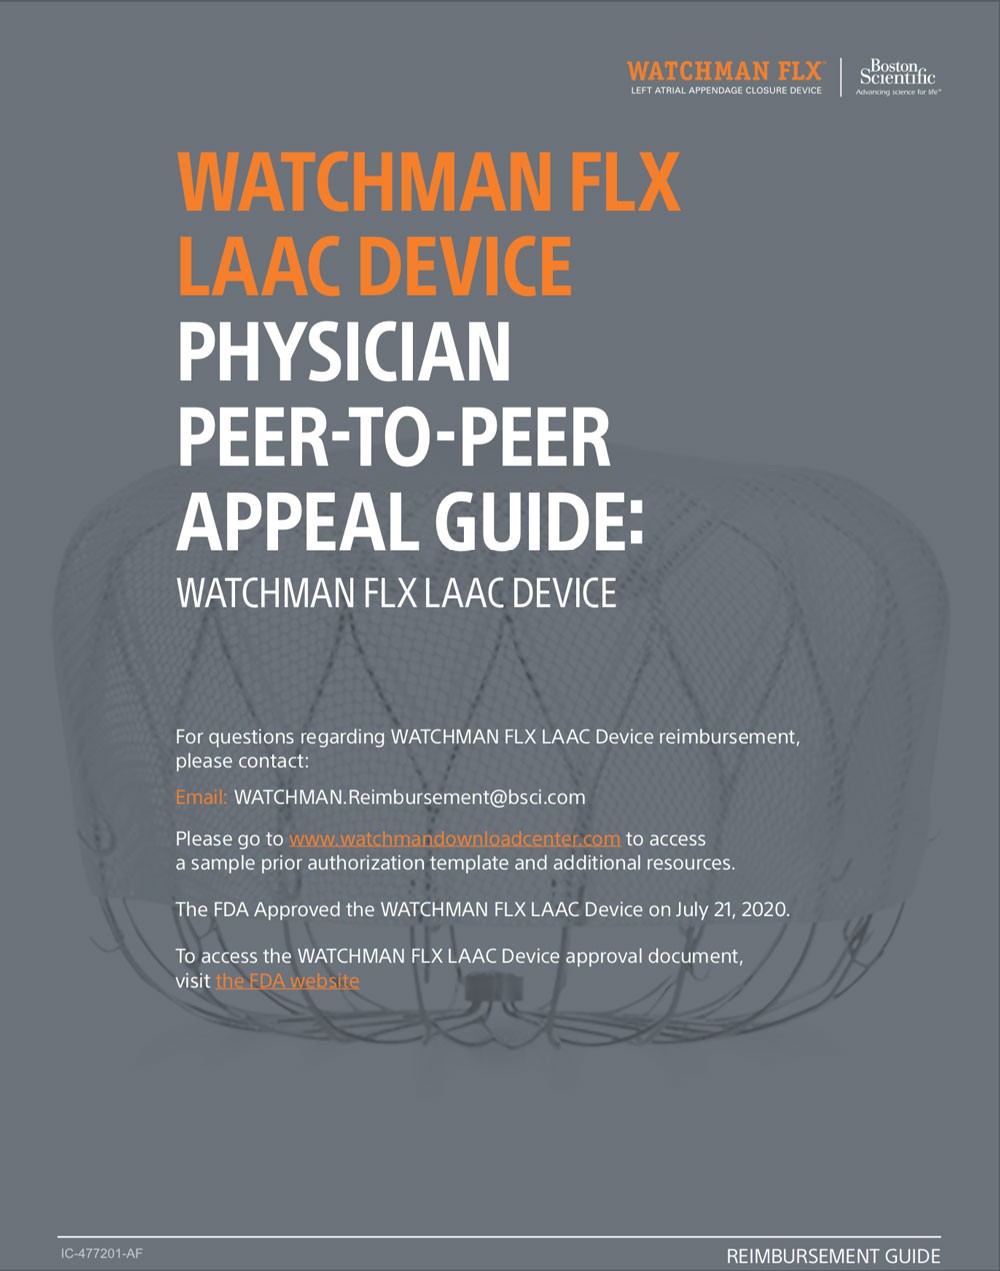 WATCHMAN FLX LAAC Device Physician Peer-to-Peer Appeal Guide